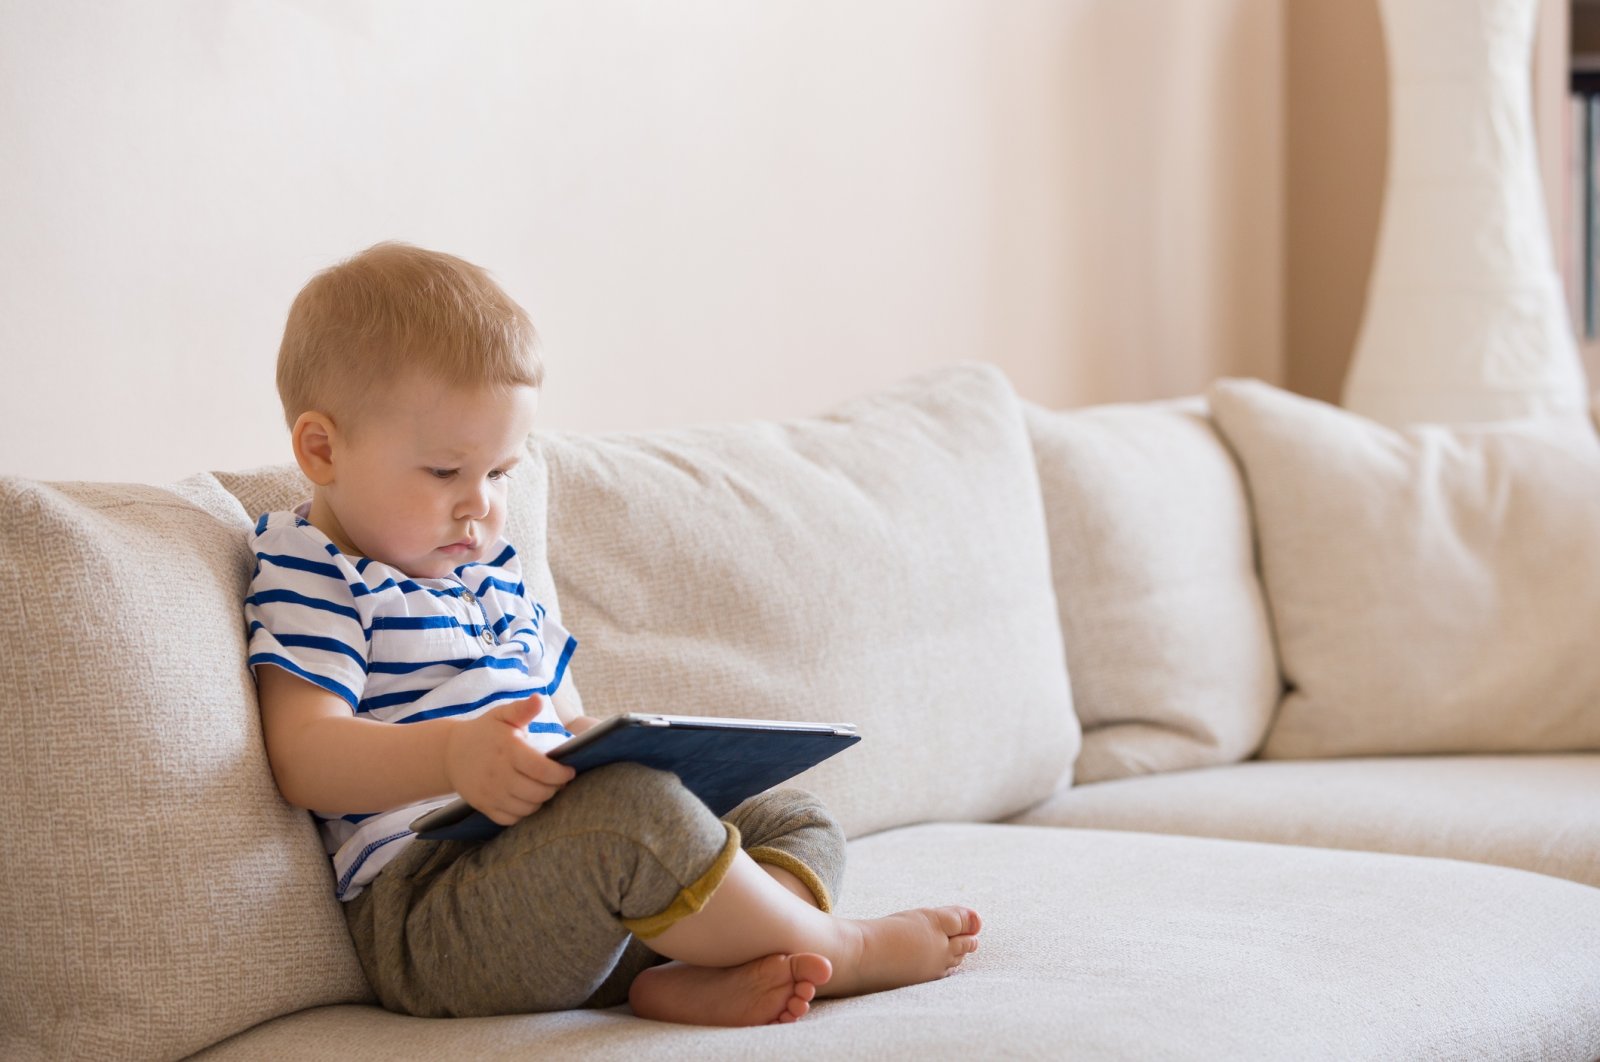 Too much screentime at a young age negatively affects children's drawing skills, psychologists say.